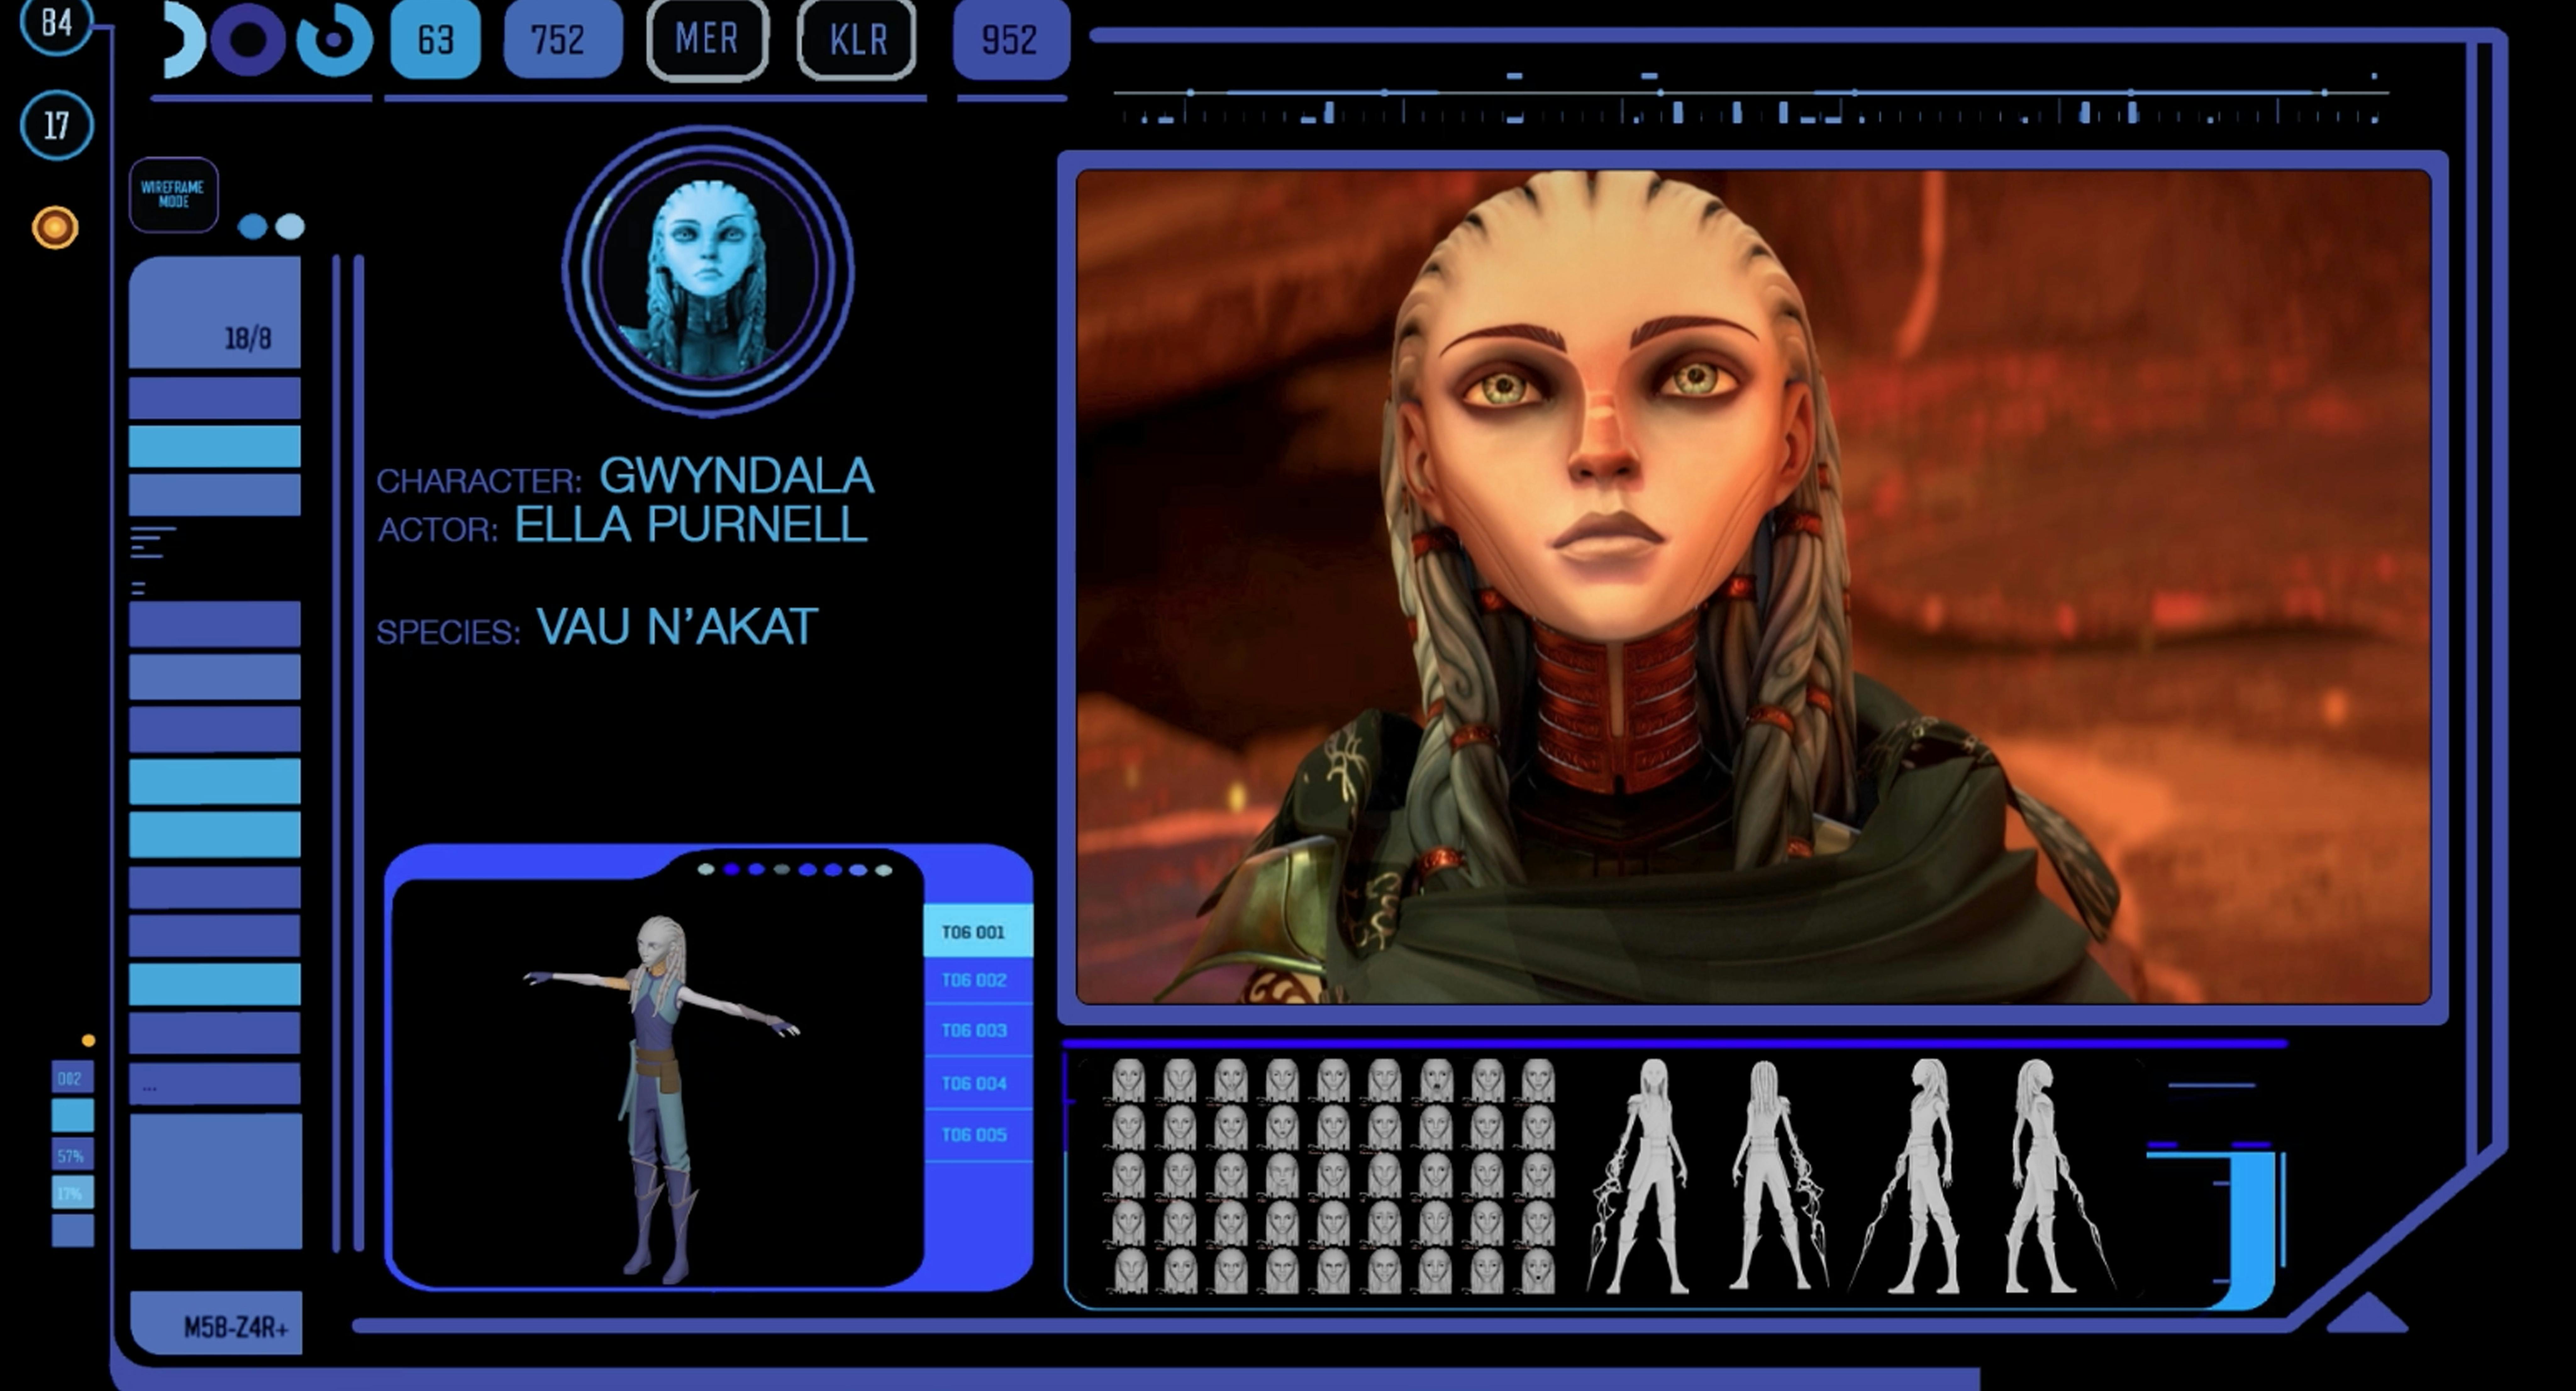 Schematics of Star Trek: Prodigy's Gwyn's character designs and renderings as well as her final on-screen appearance